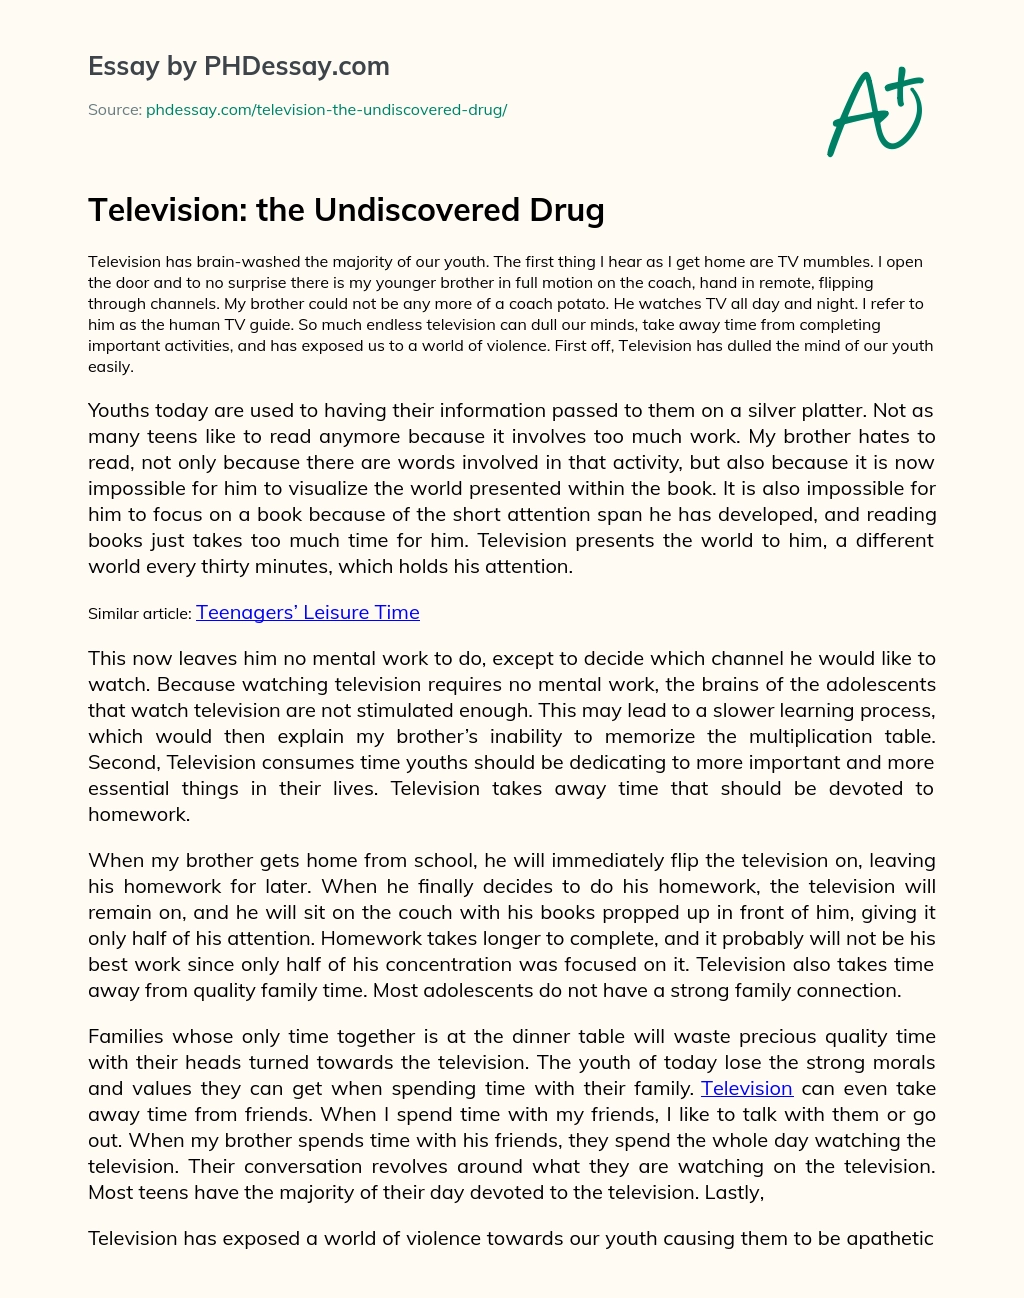 Television: the Undiscovered Drug essay